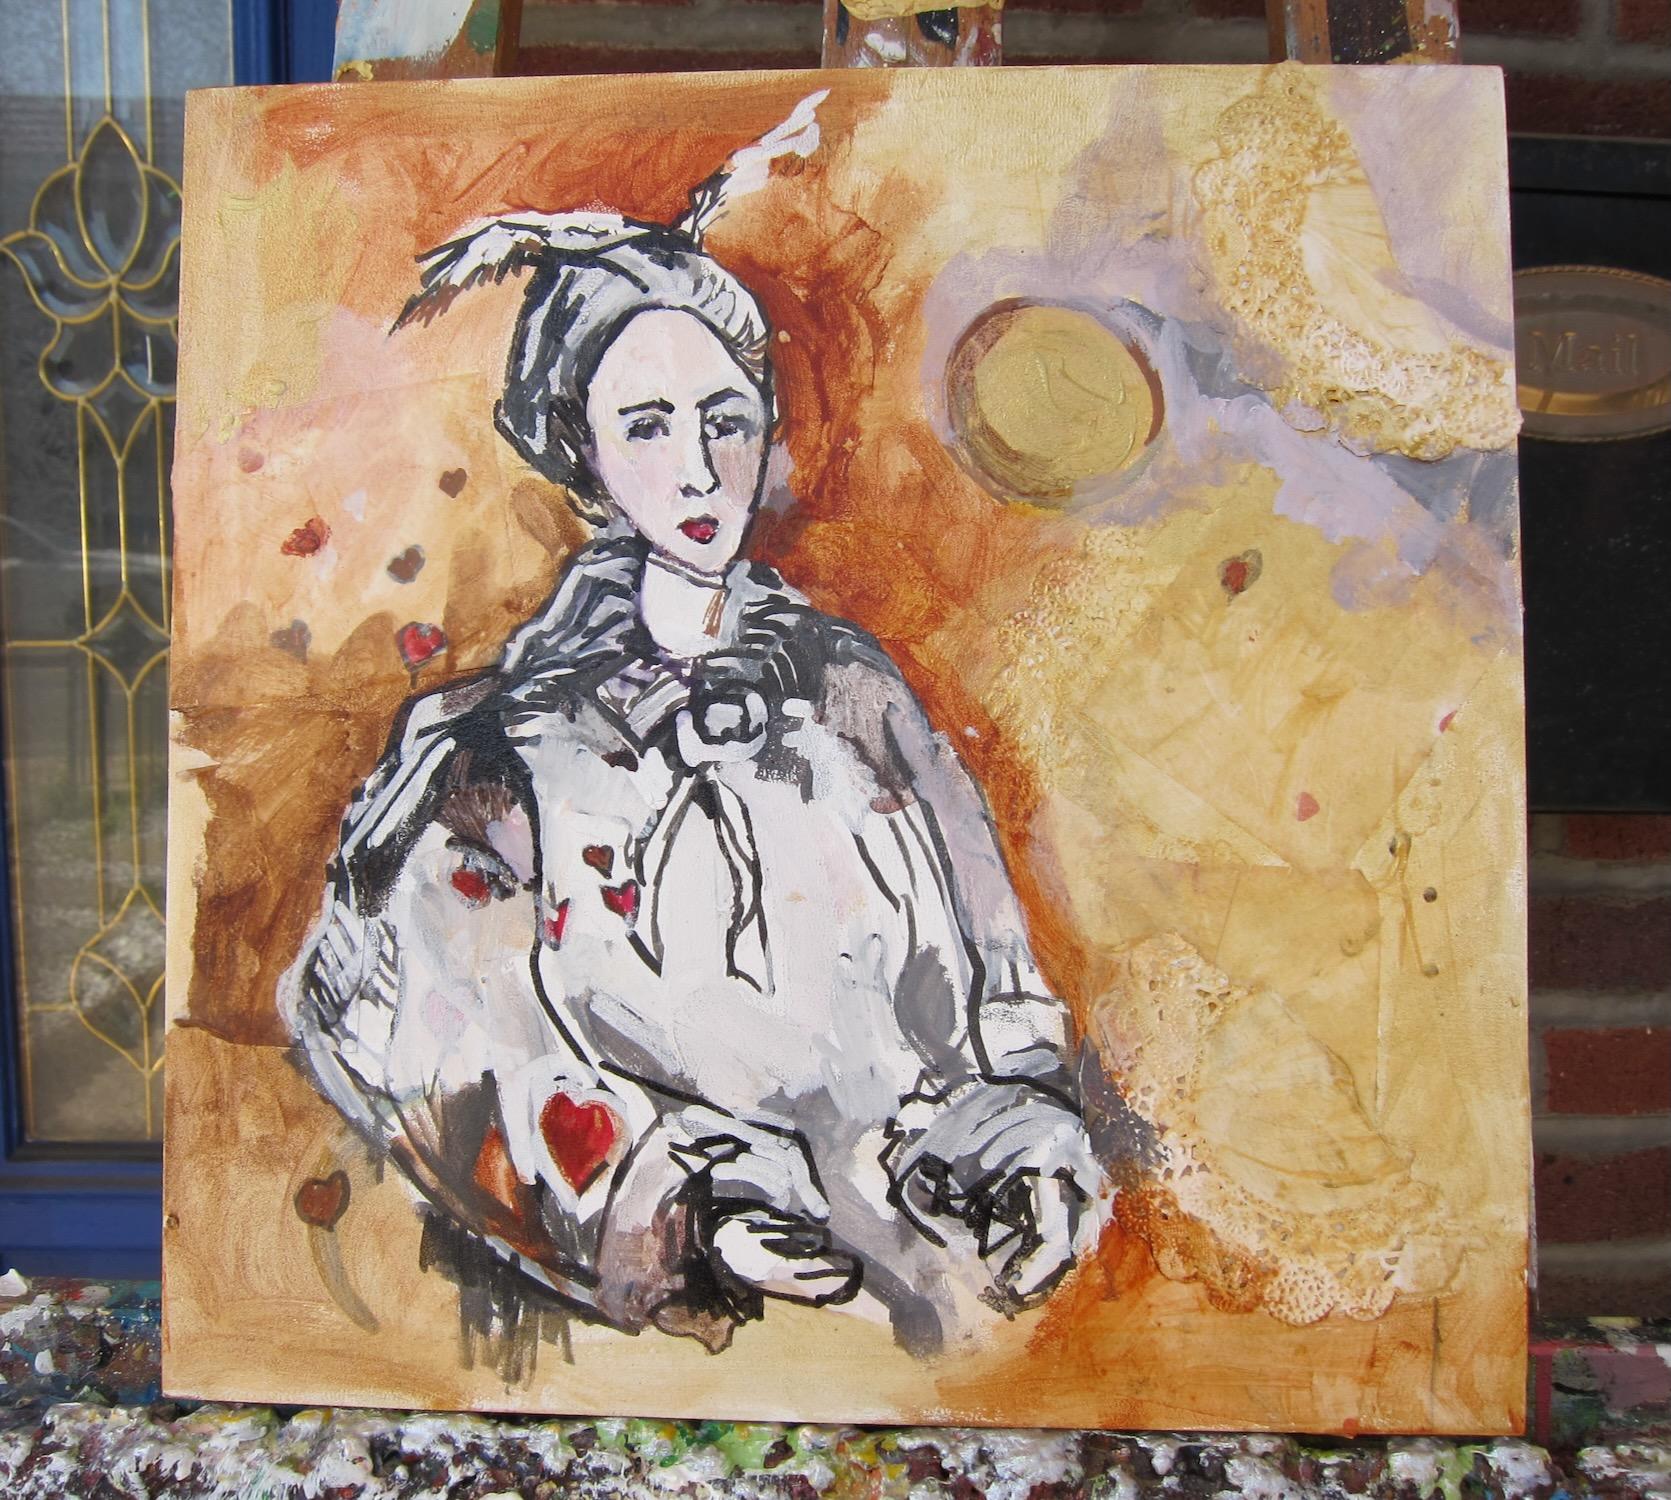 <p>Artist Comments<br>Artist Colette Wirz Nauke explores mixed media and freestyle designs in this portrait. The lady exudes a stoic grace, with patterns of heart embellishing her presence. Subtle shades of sienna and delicate hints of gold infuse